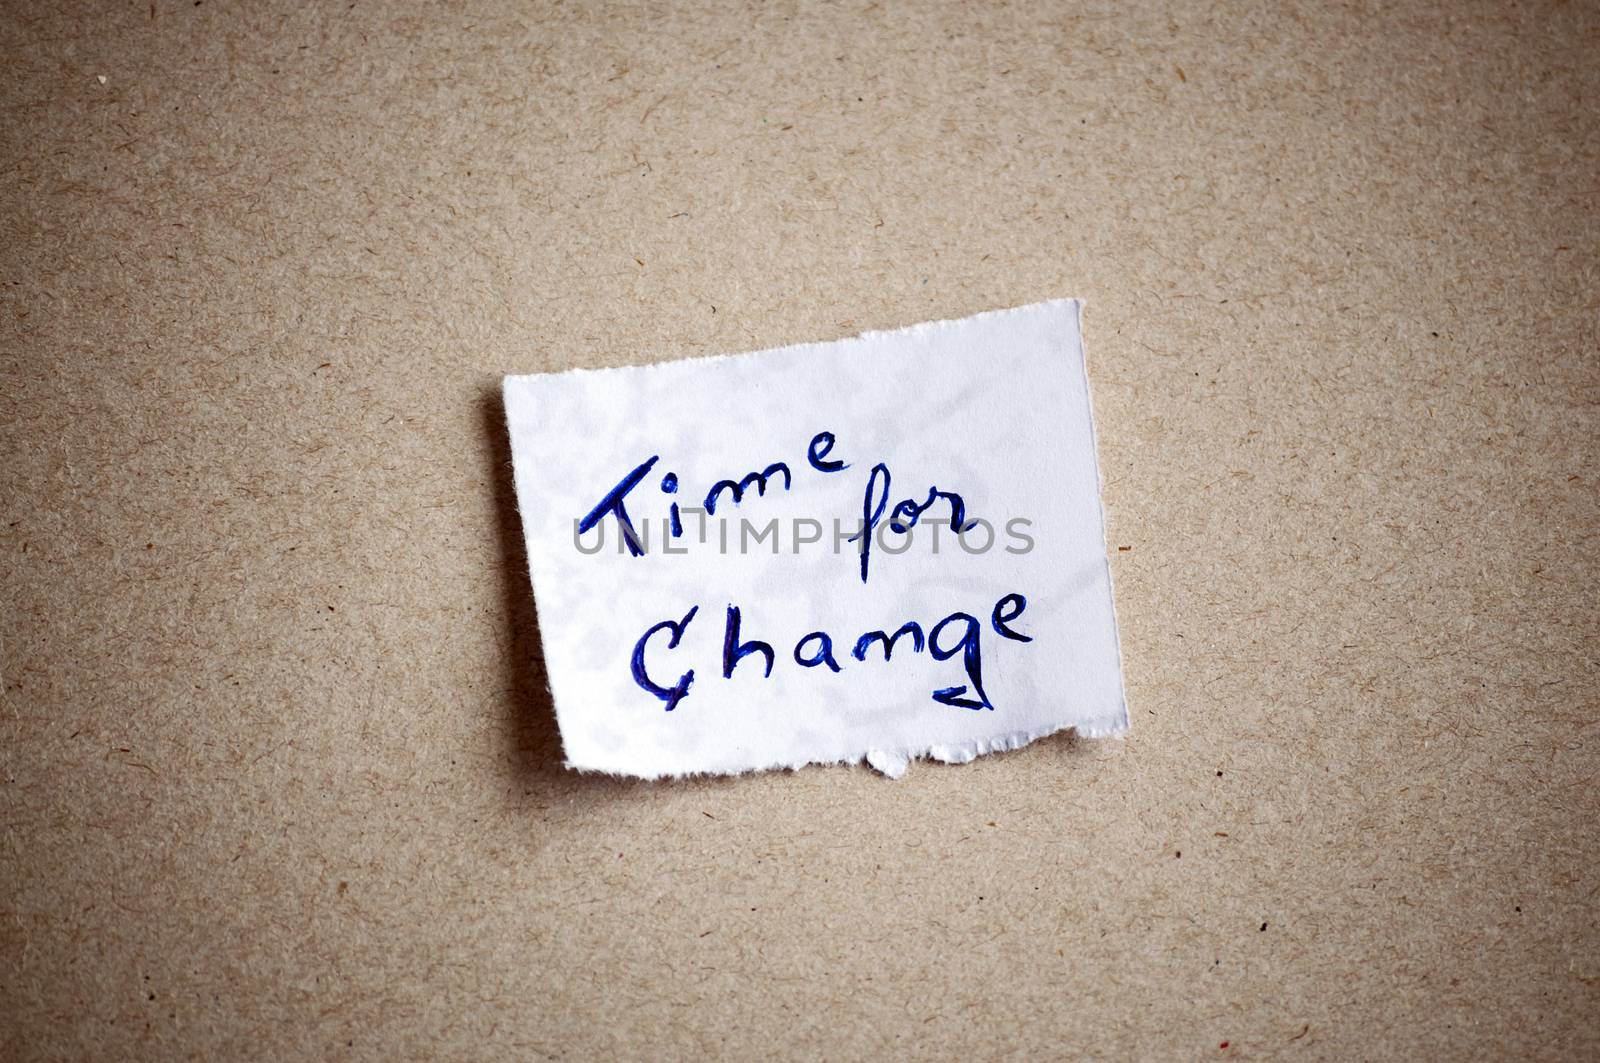 Time for change message,written on piece of paper, on cardboard background. Space for your text.